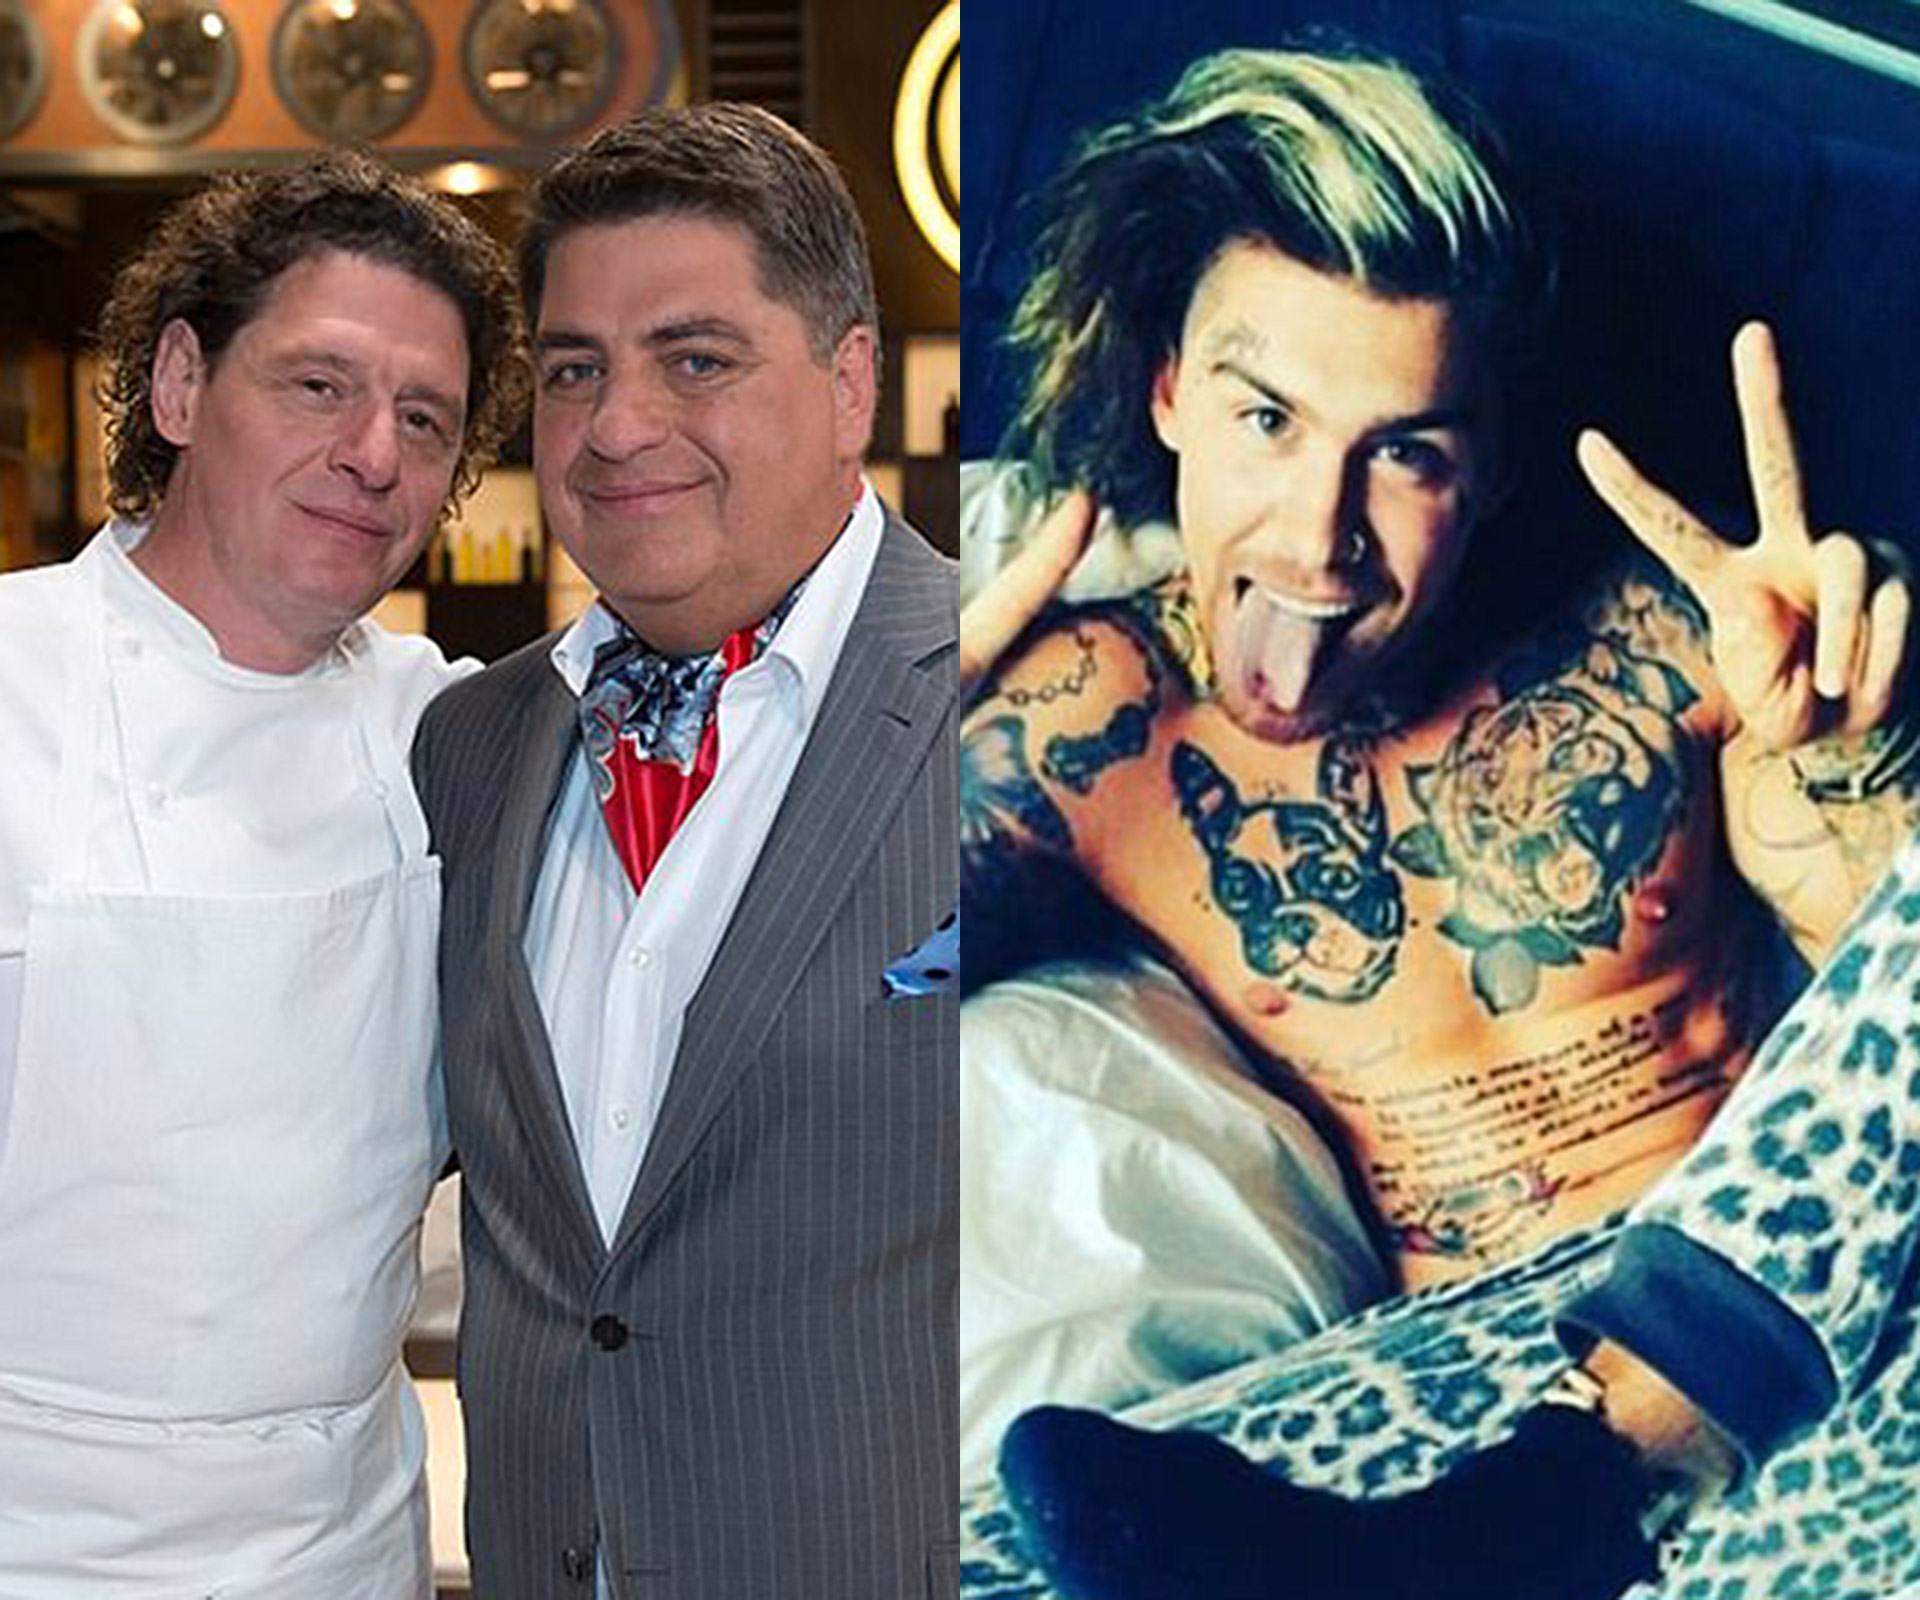 Marco Pierre White Jr’s foul-mouthed tirade against Matt Preston will shock you (to say the least!)